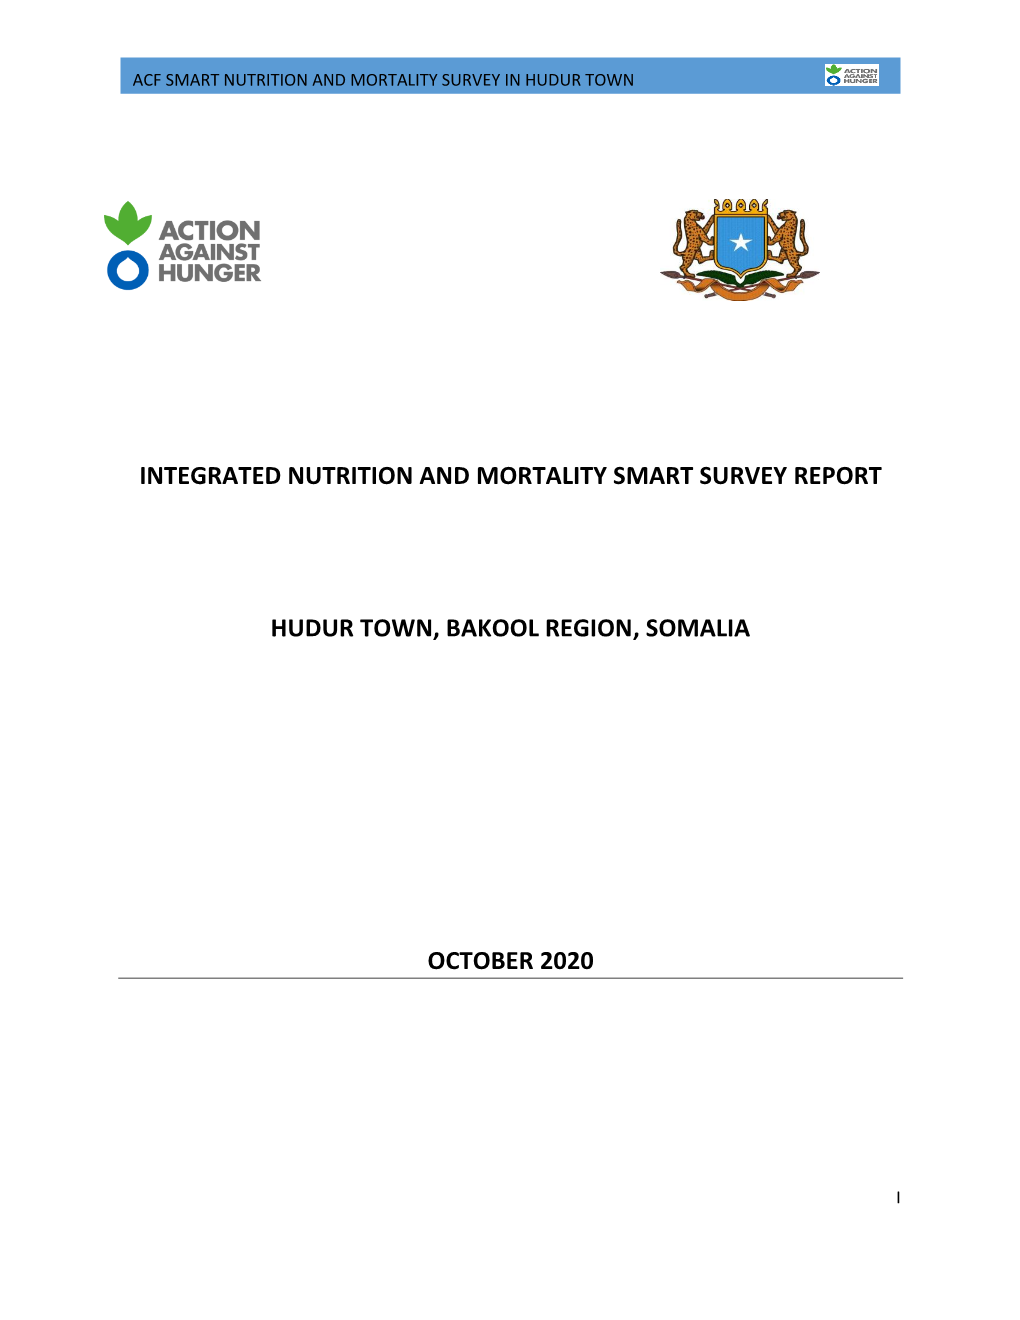 Integrated Nutrition and Mortality Smart Survey Report